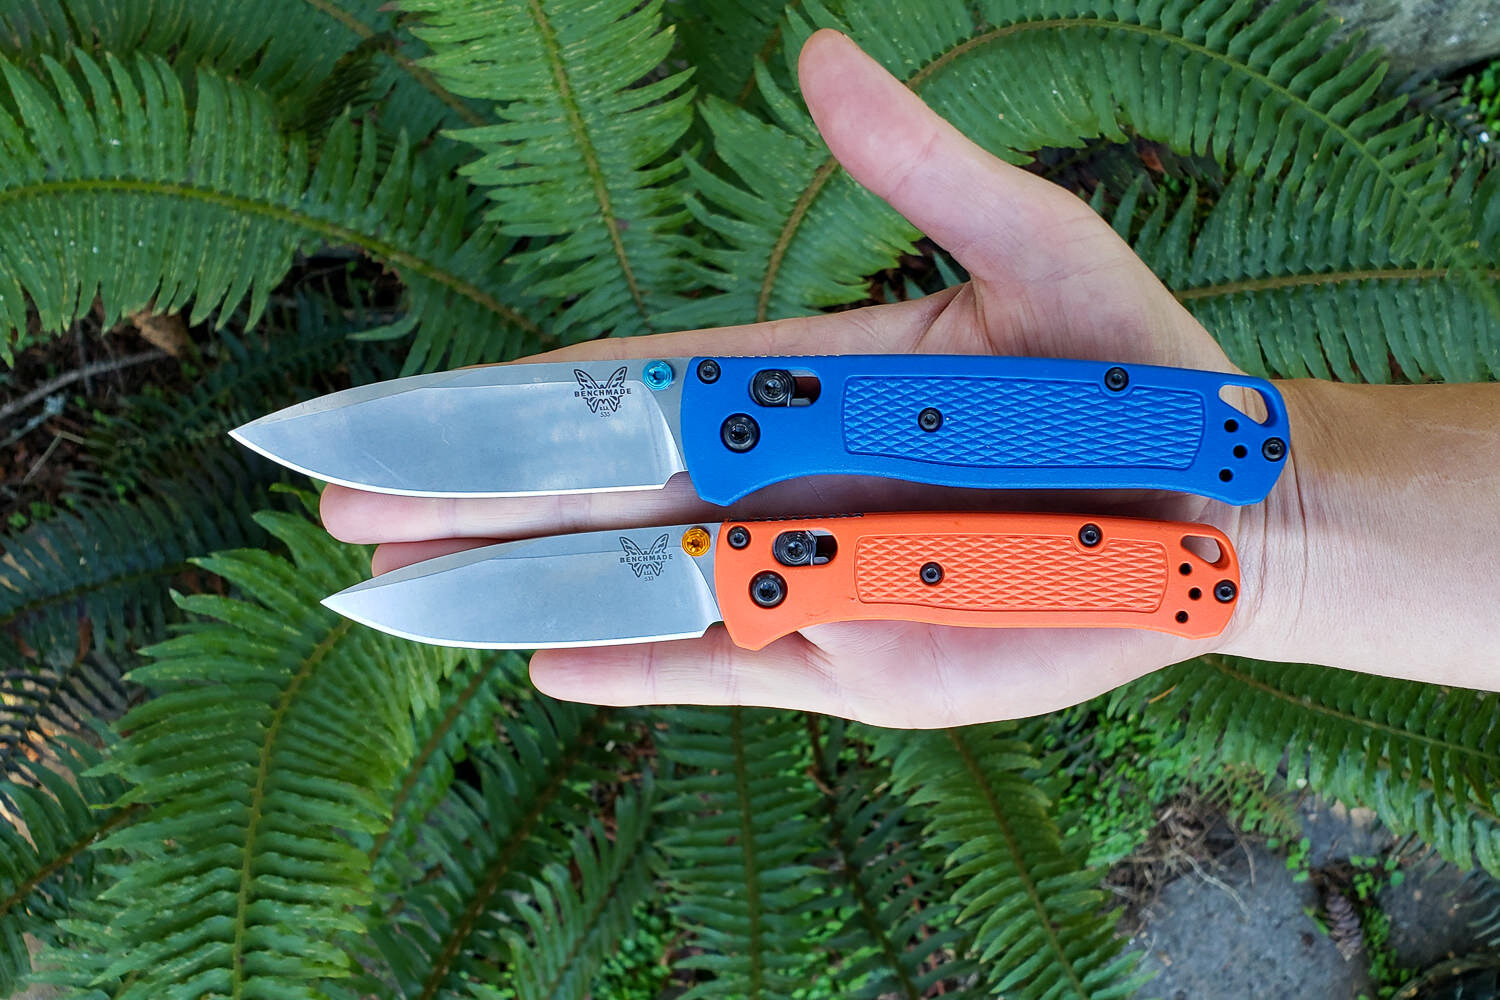 Comparing the sizes of the Benchmade Bugout 535 & Mini Bugout 533